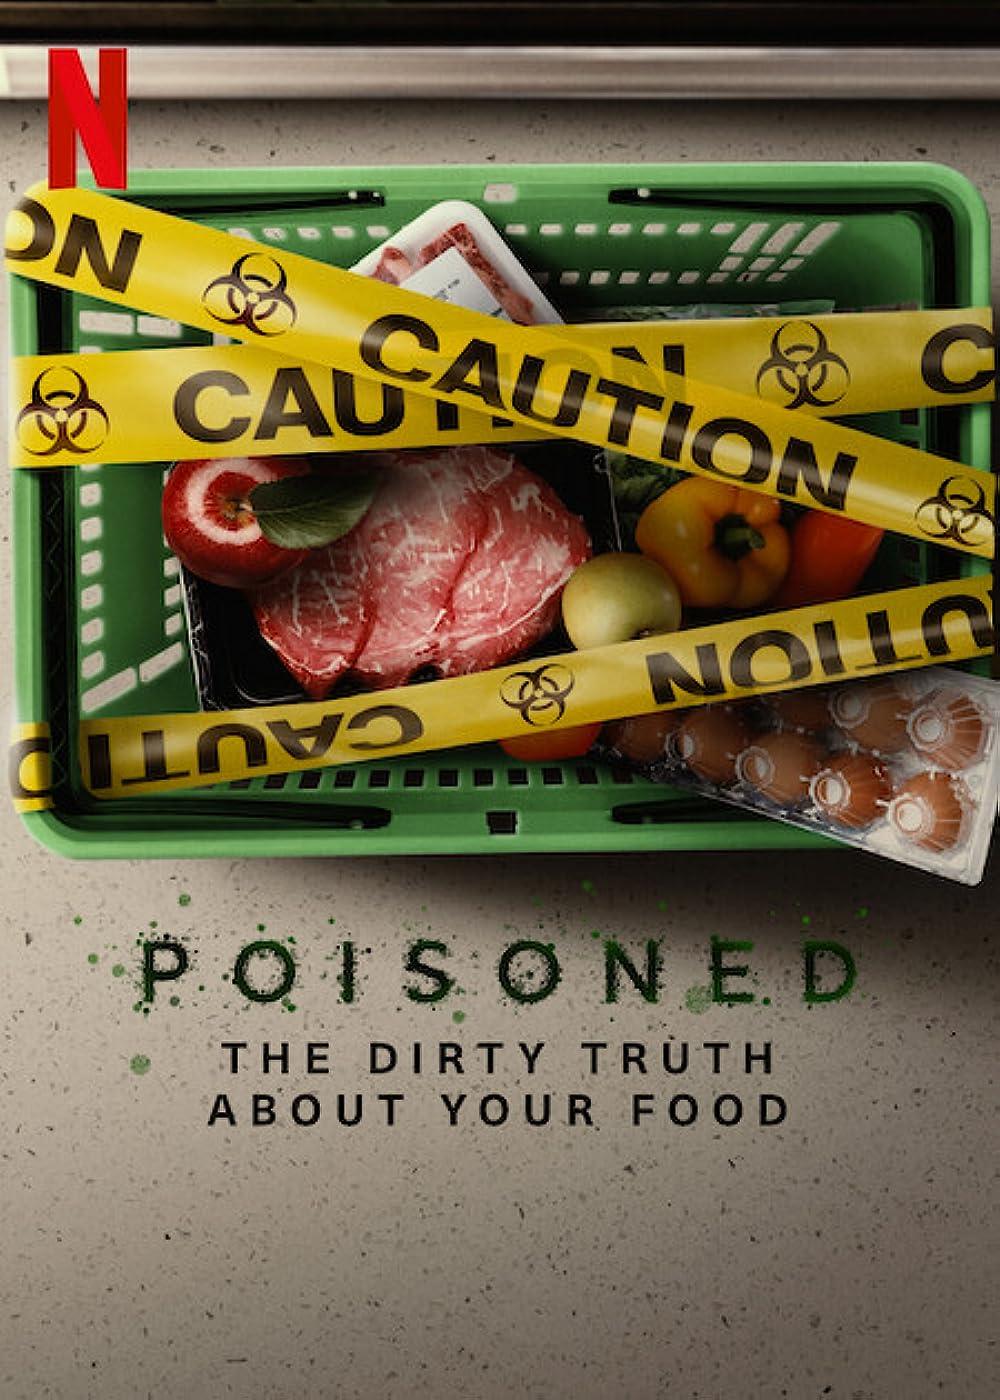 Poisoned: The Dirty Truth About Your Food Image